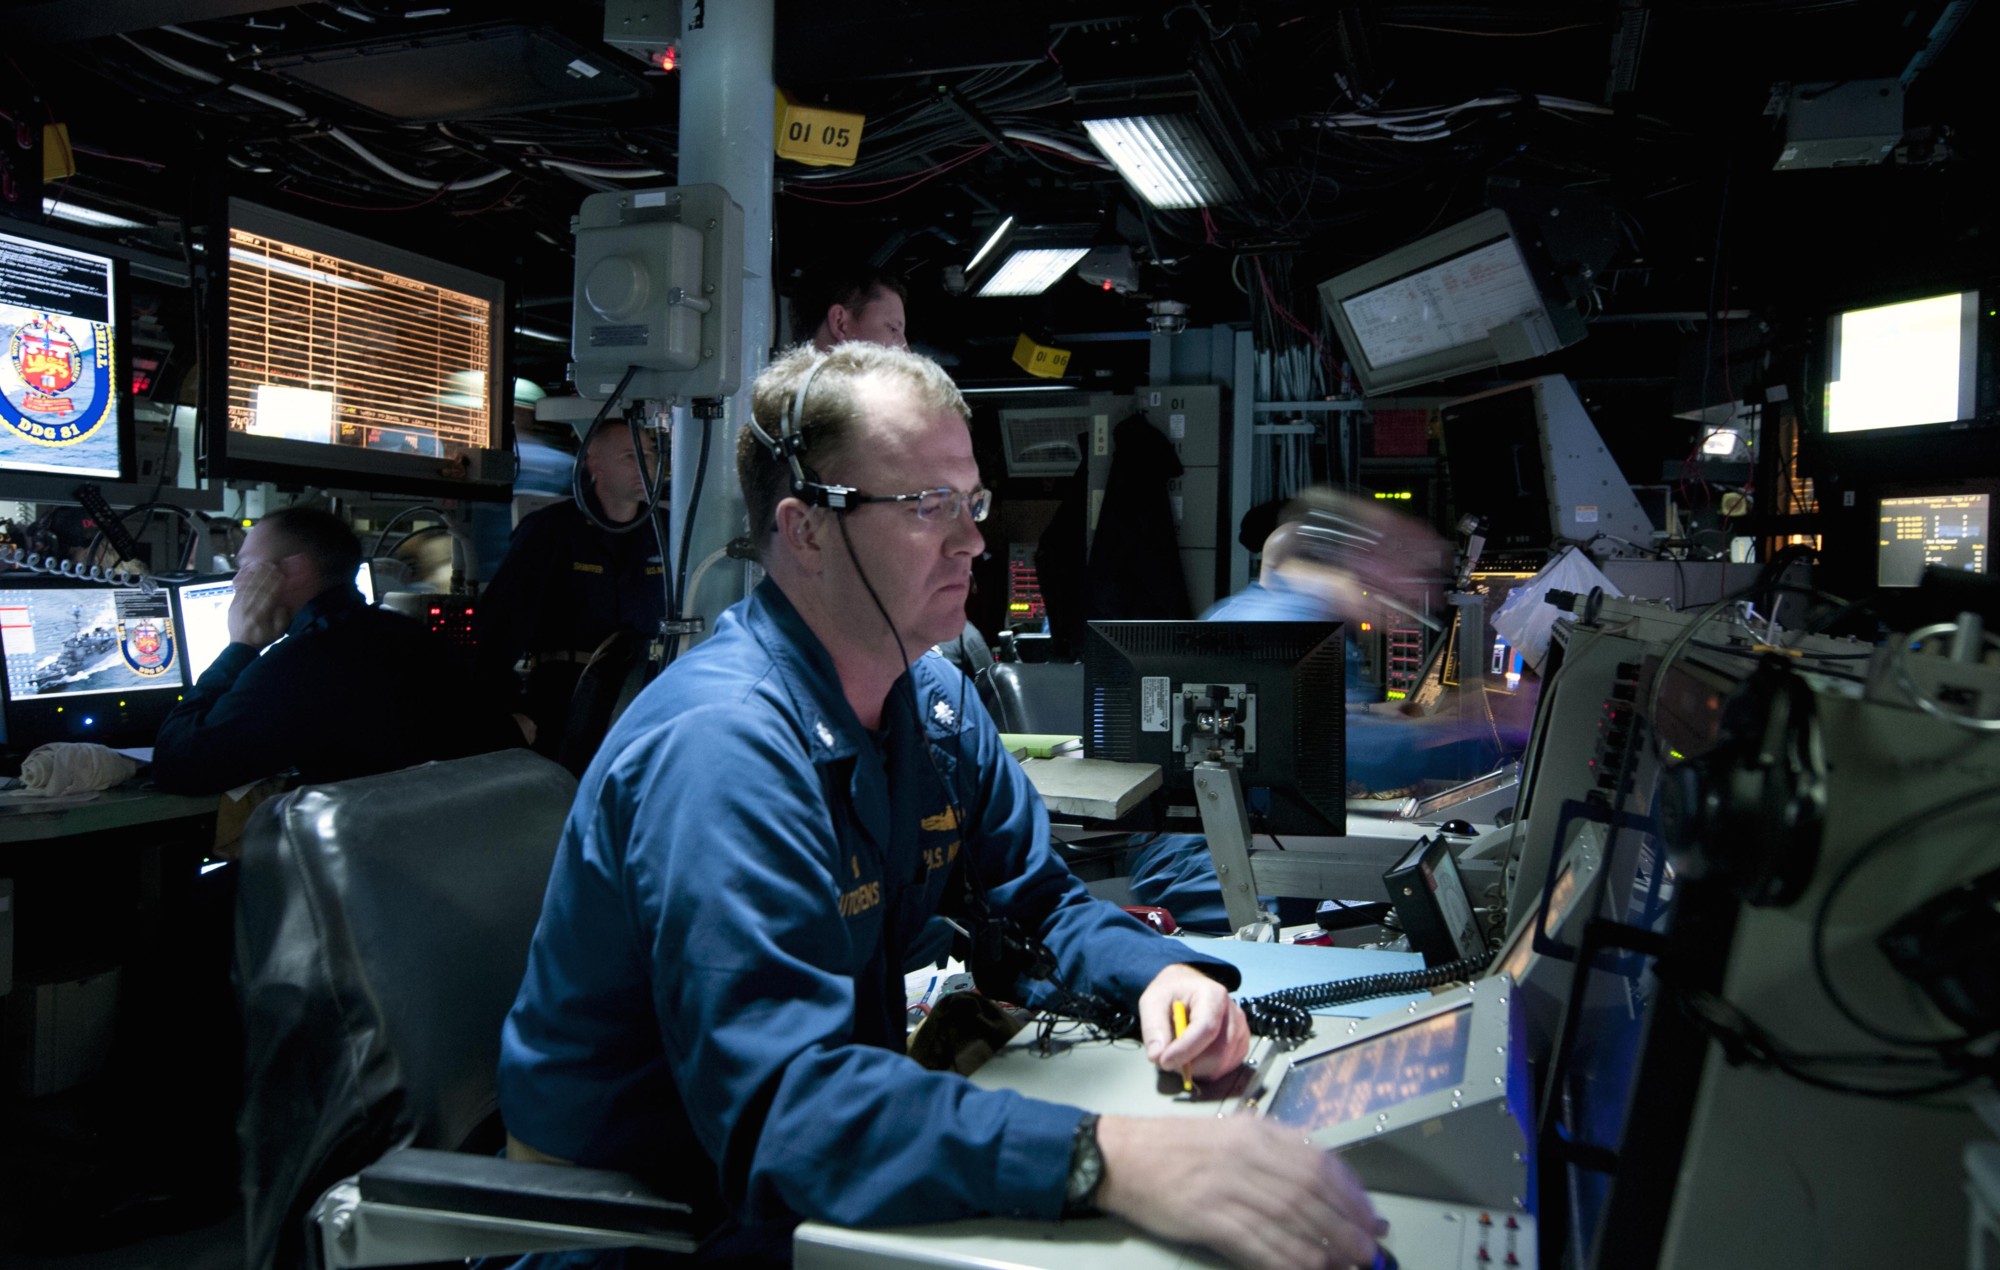 ddg-81 uss winston s. churchill arleigh burke class guided missile destroyer aegis 35 combat information center cic